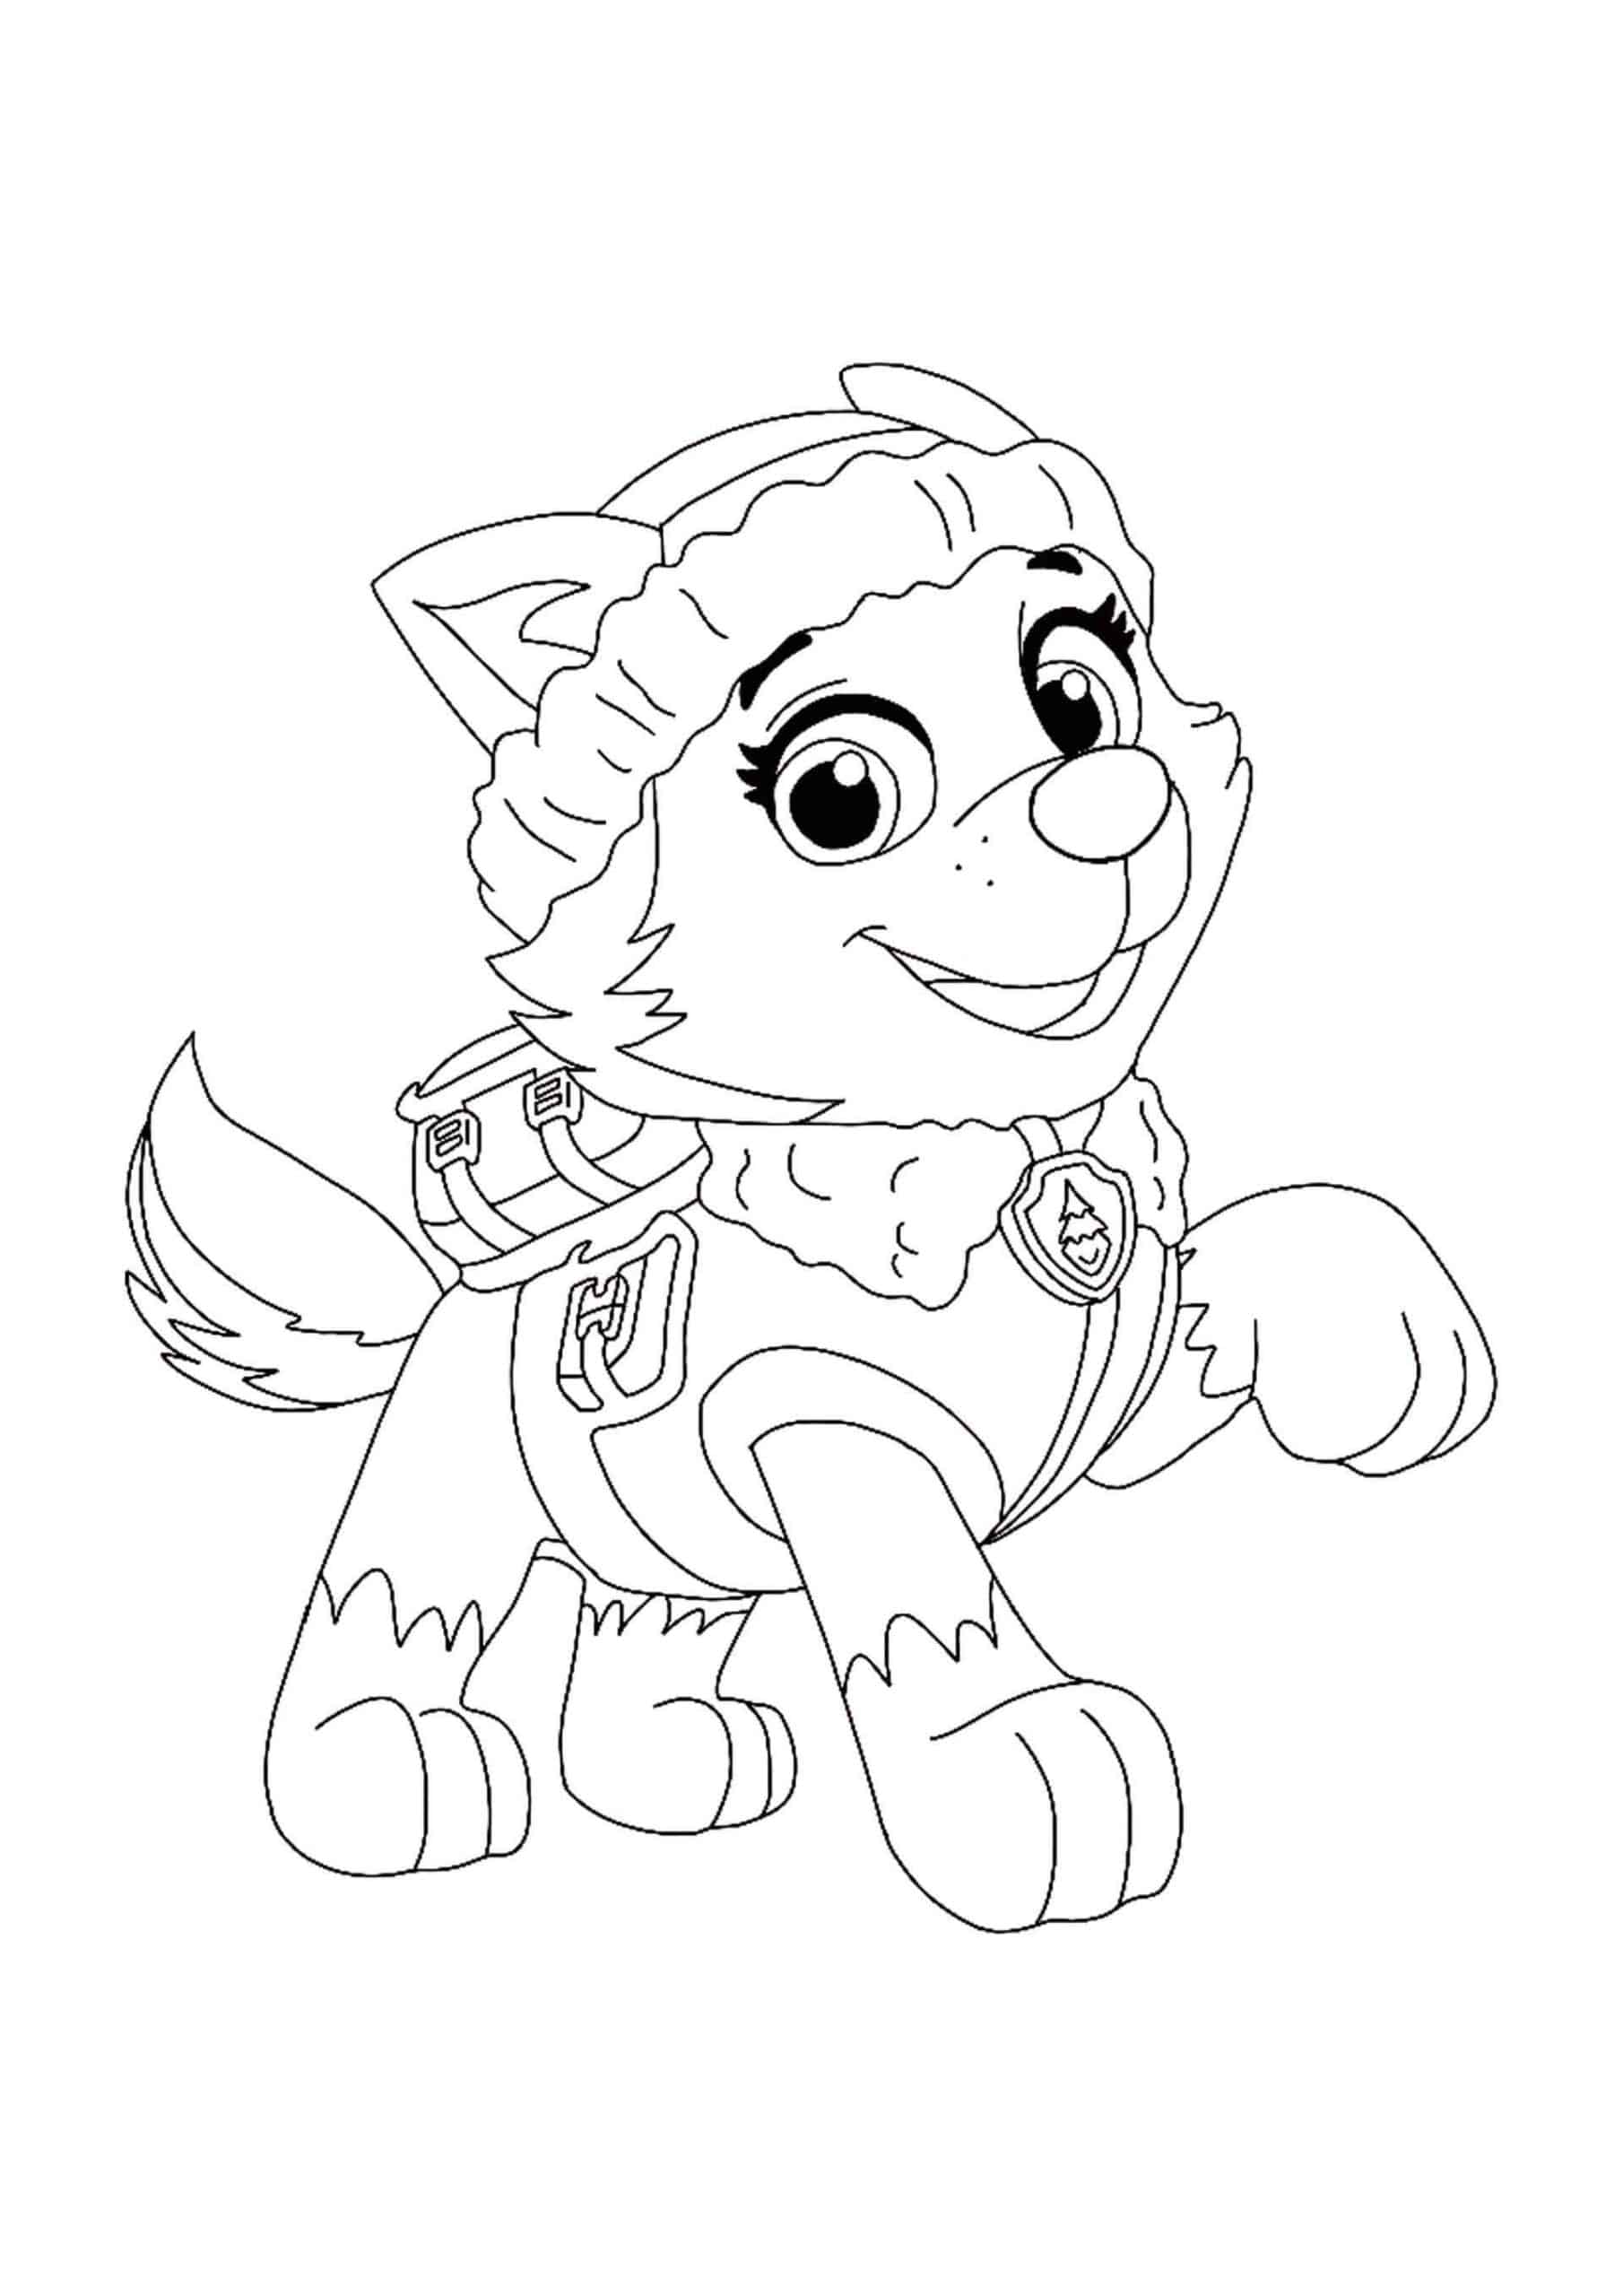 Paw Patrol Everest Coloring Pages - 4 Free Printable Coloring Sheets | 2020